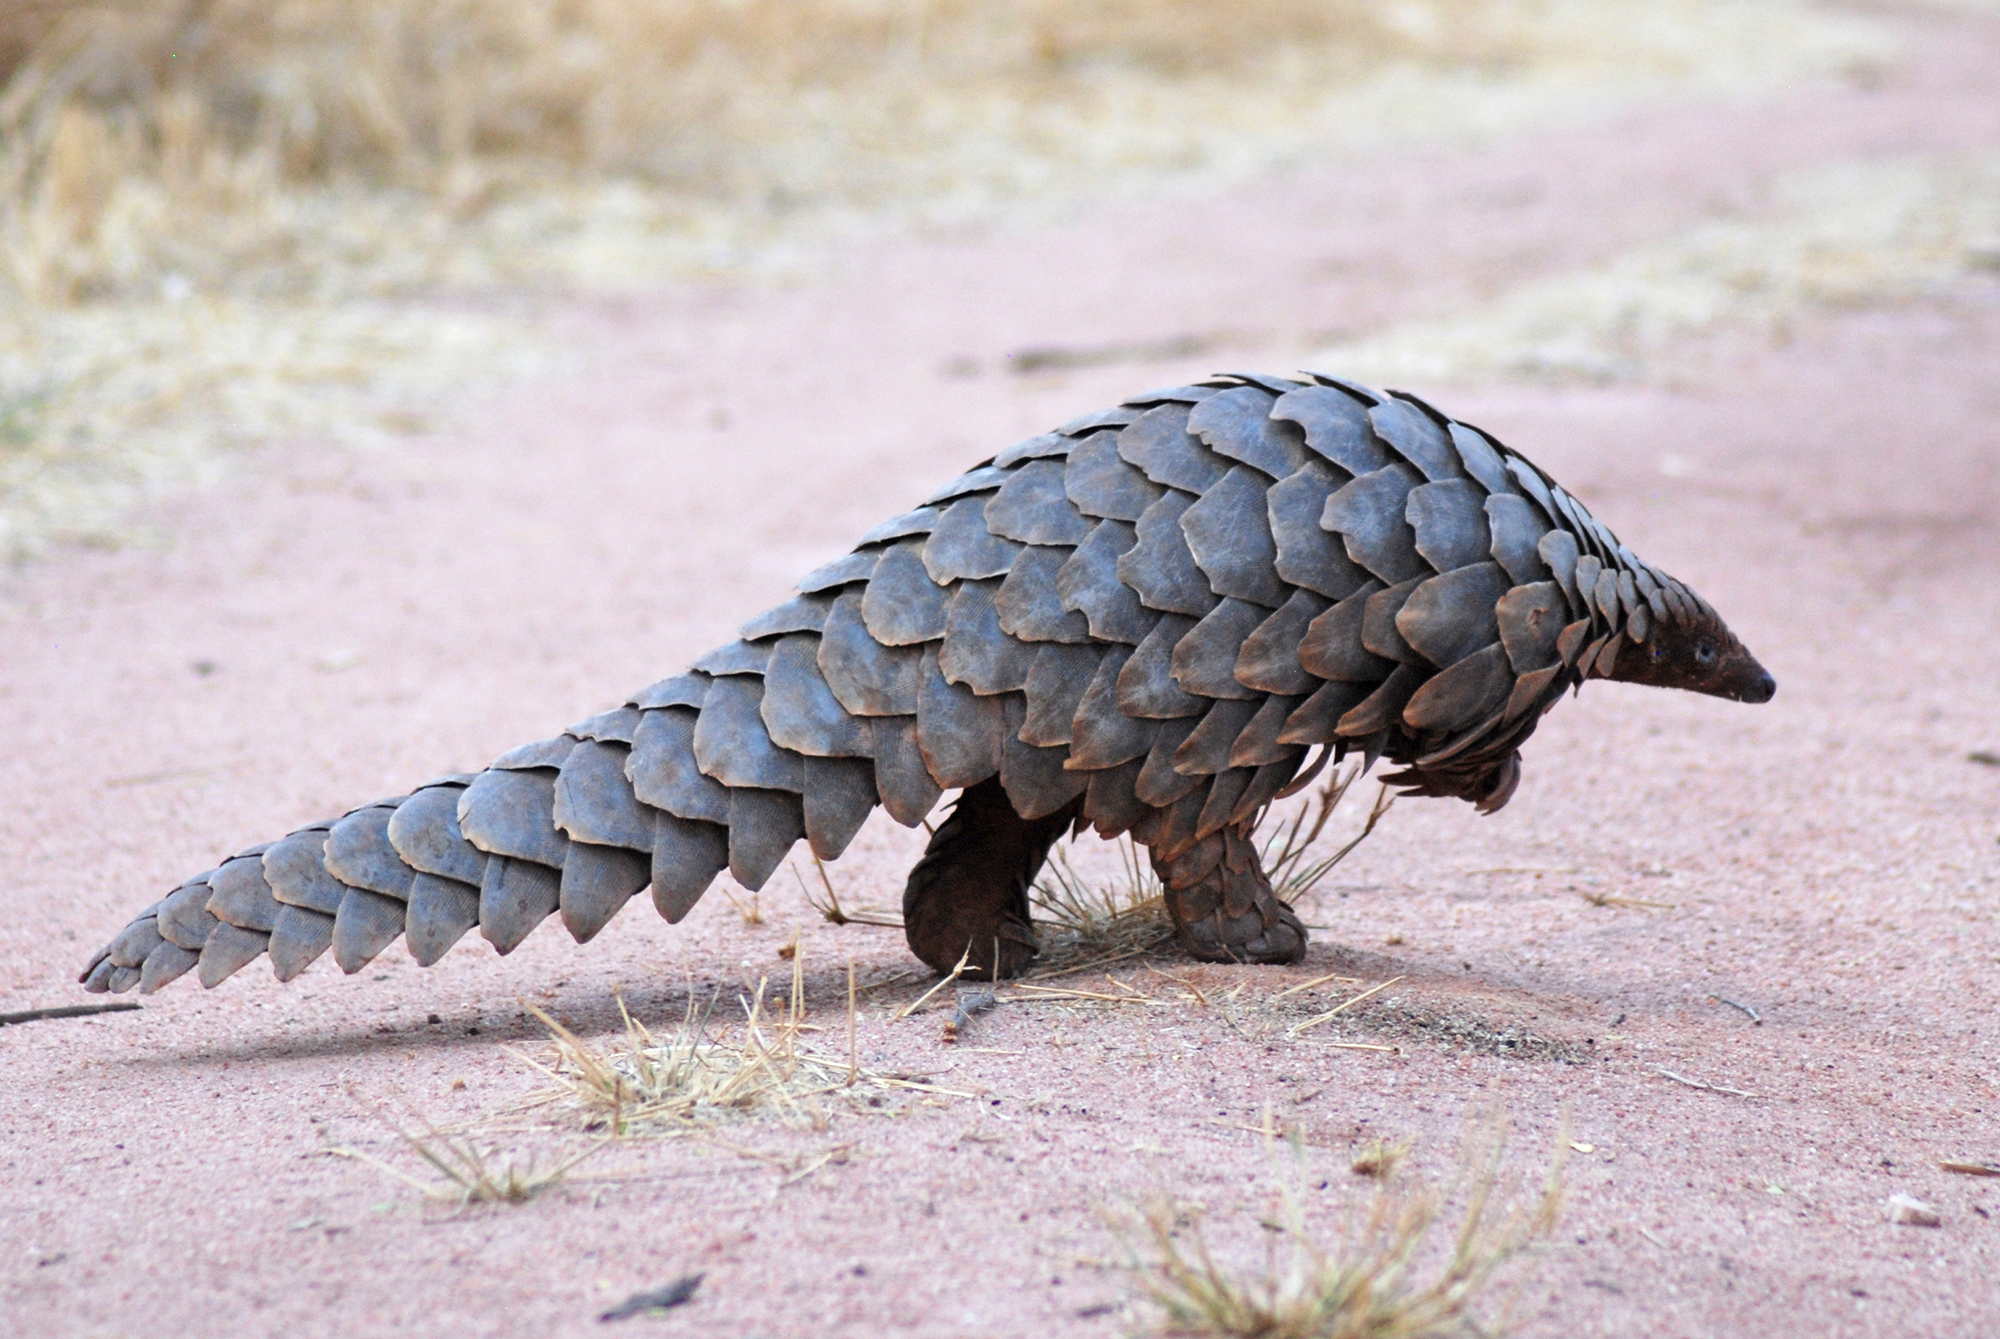 Is the keratin in a pangolin’s scales as durable as our fingernails? -Hannah | 'Q ...